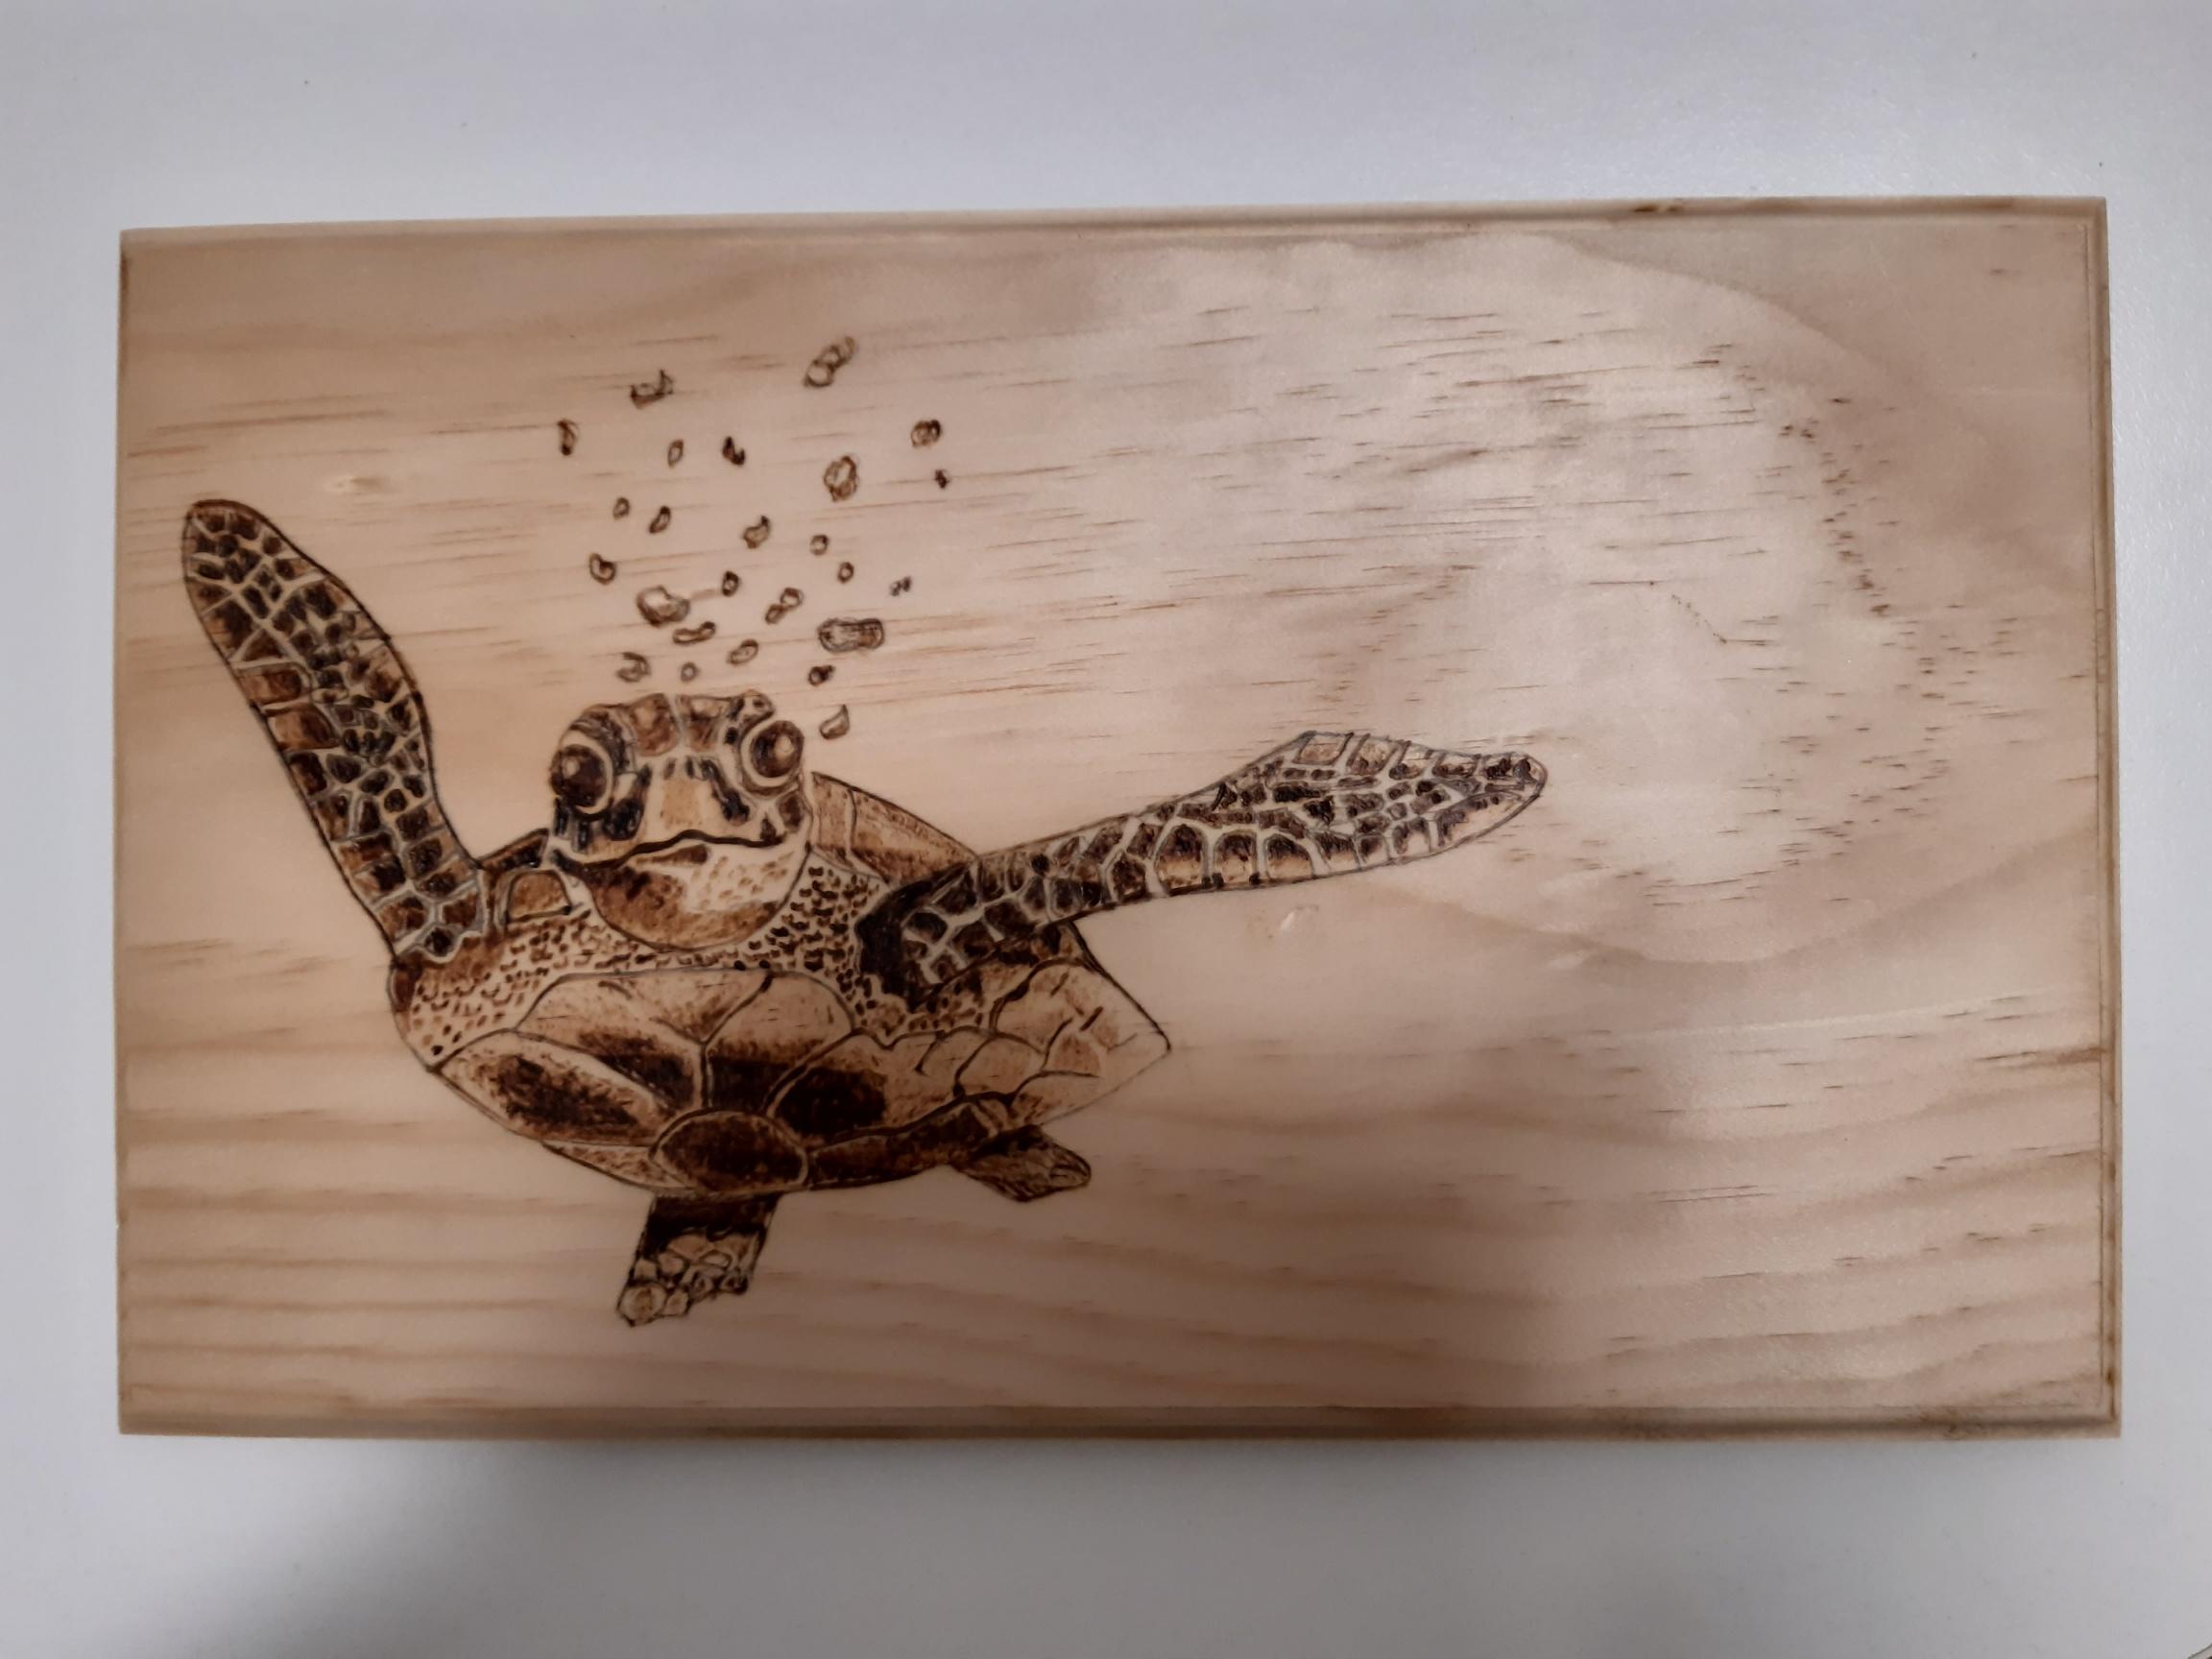 Pyrography entry level short course